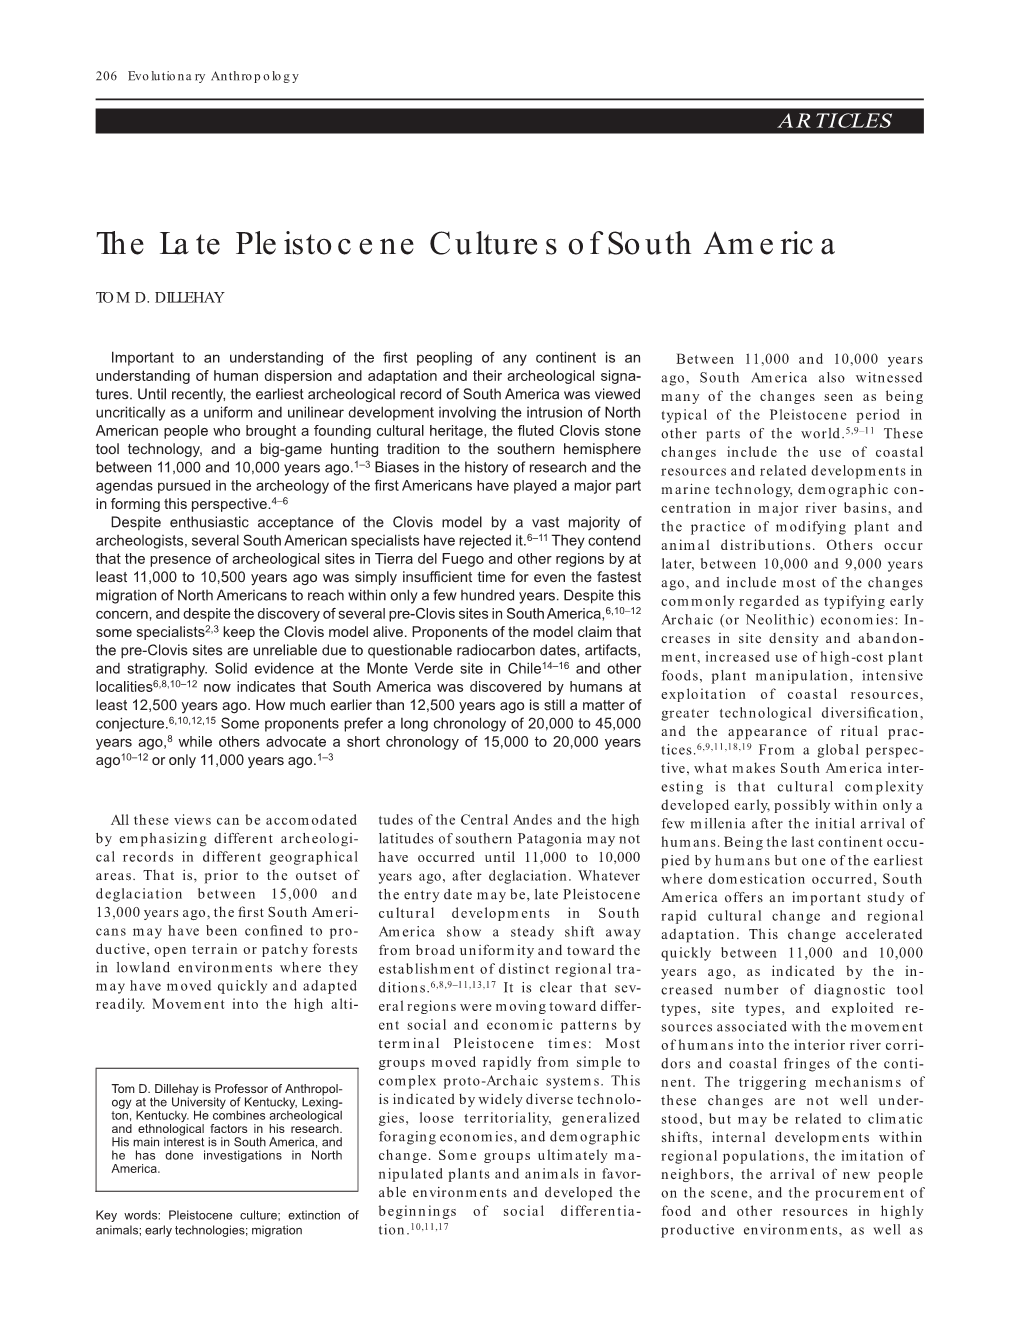 The Late Pleistocene Cultures of South America